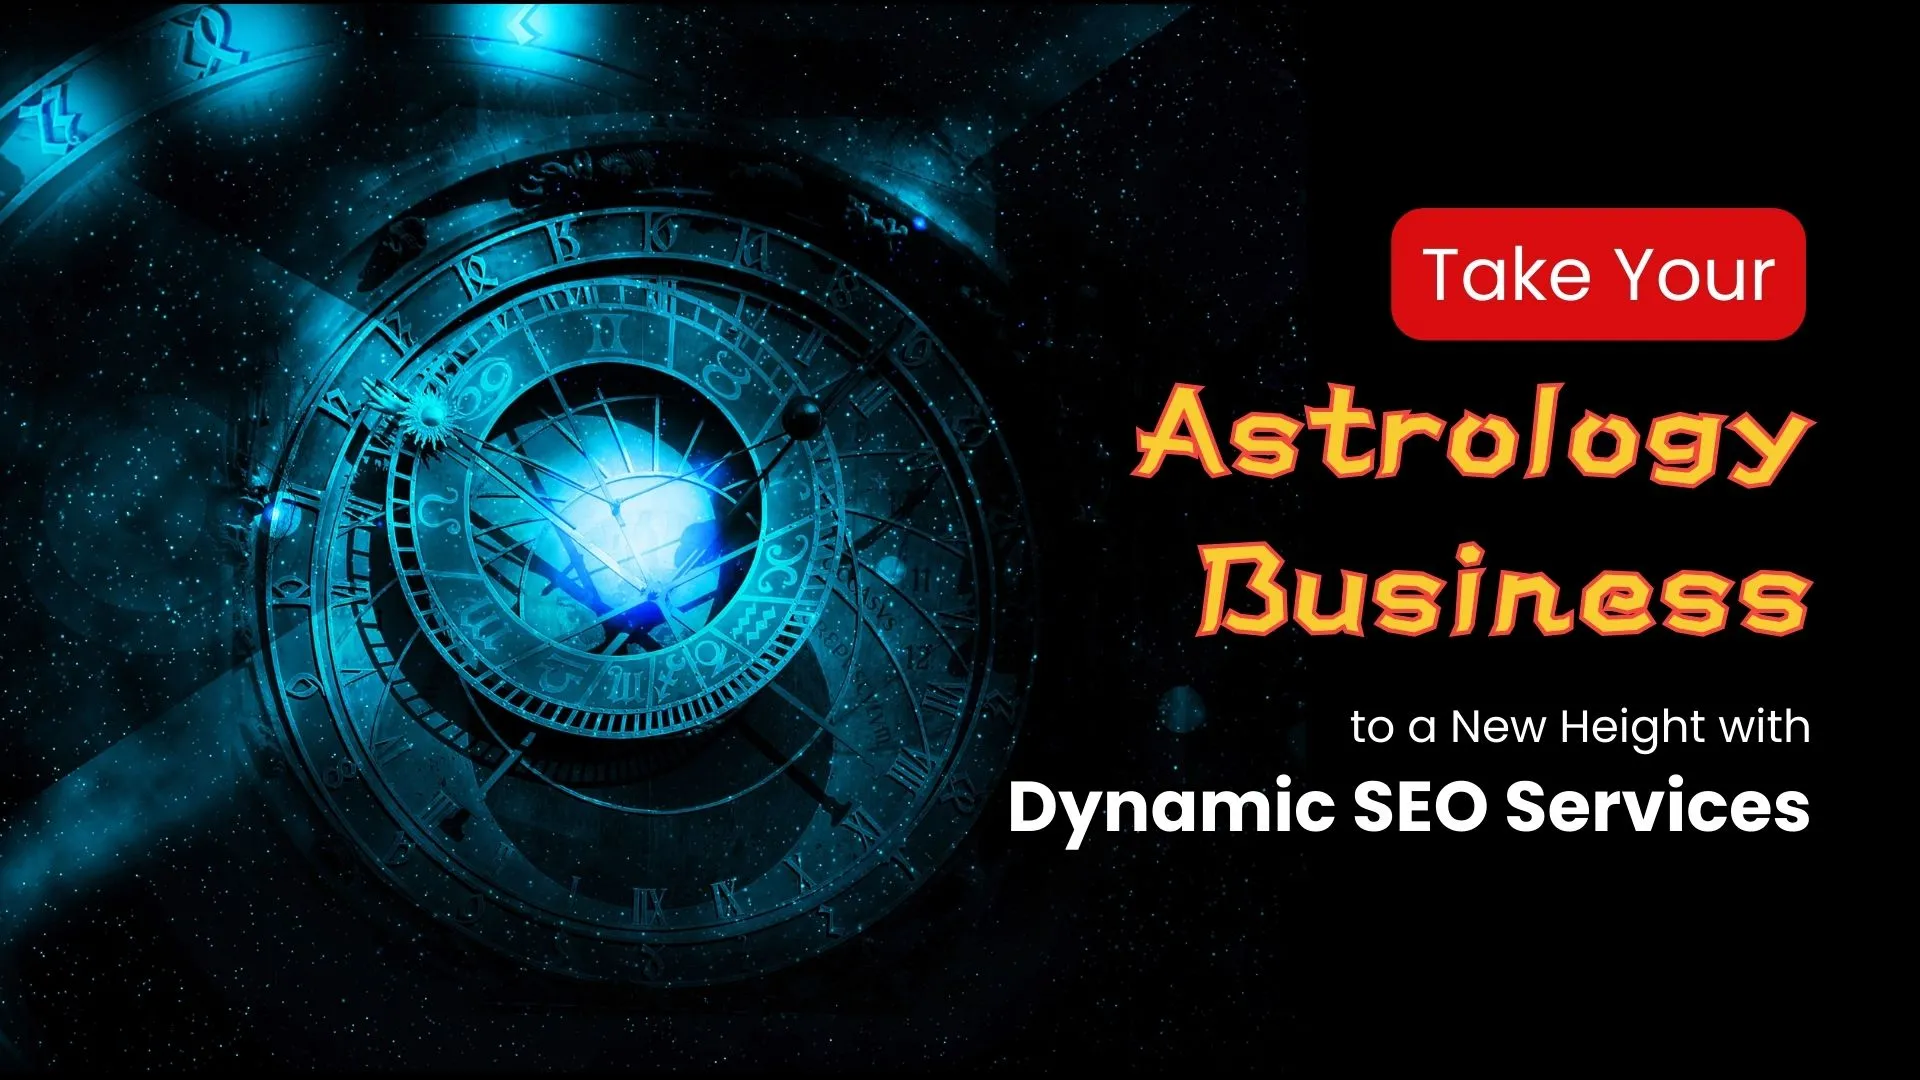 Take Your Astrology Business to a New Height with Dynamic SEO Services